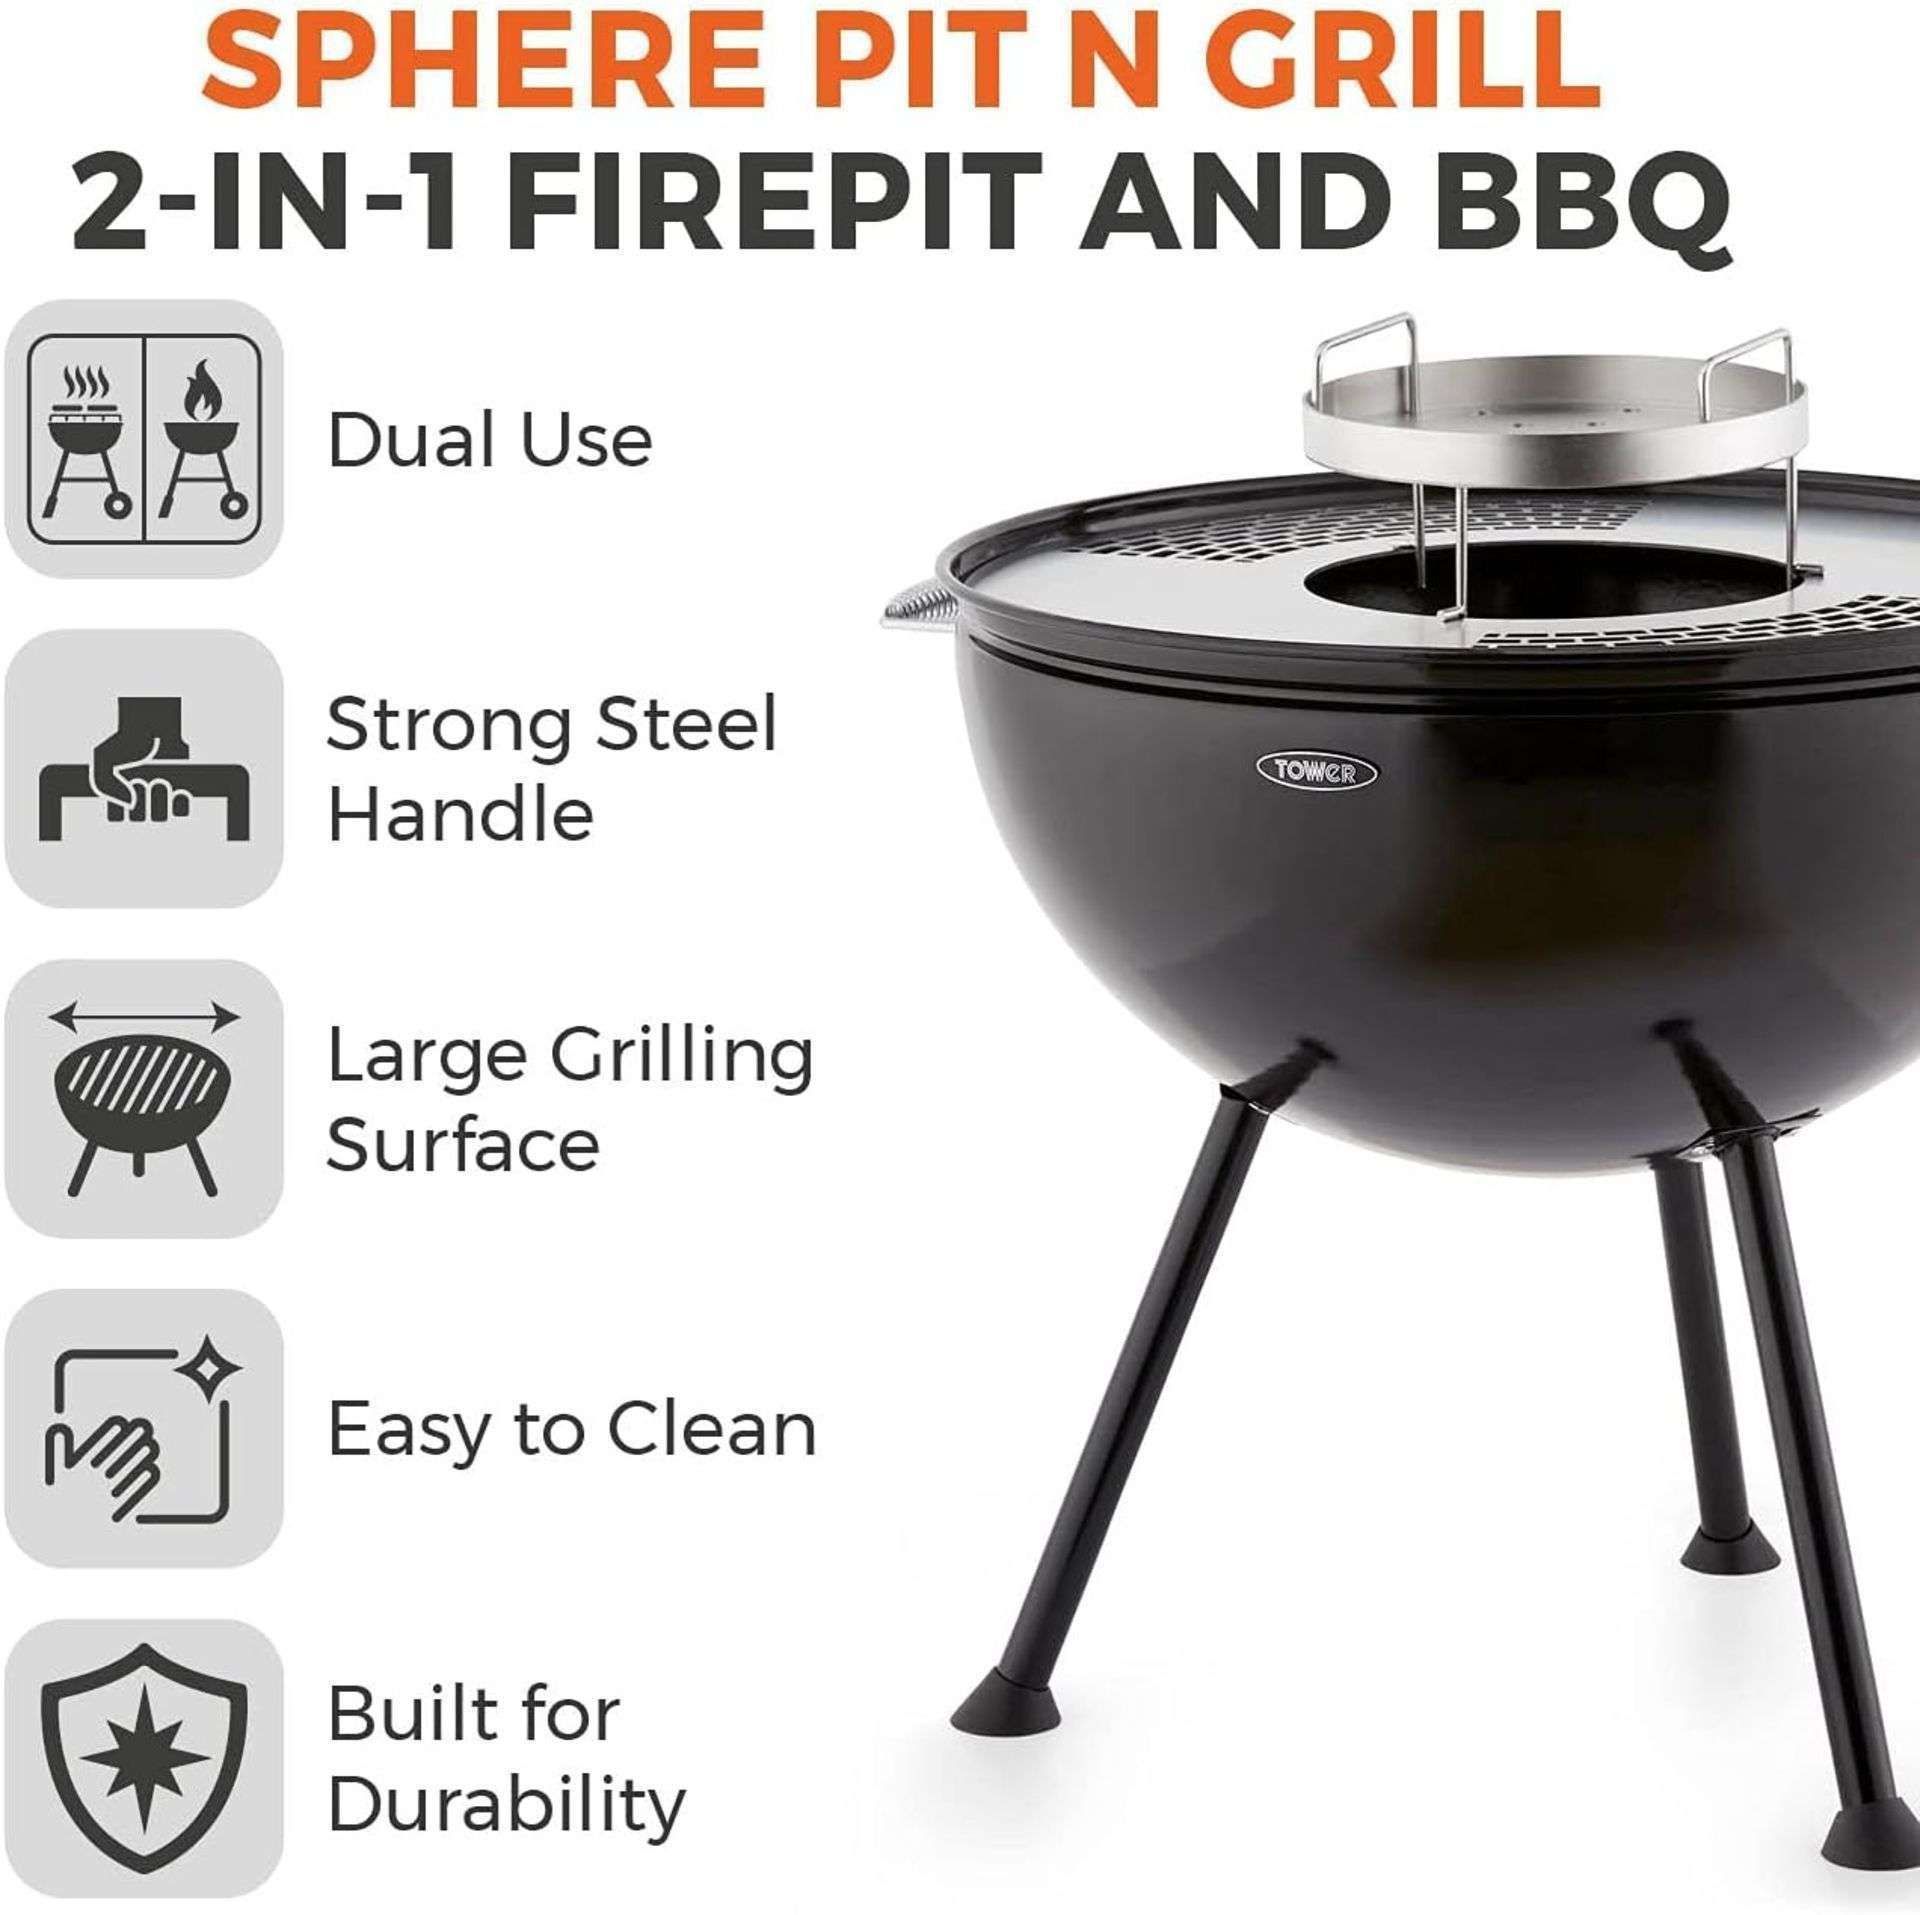 Brand New Tower Sphere Fire Pit and BBQ Grill, Black, DUAL USE â€“ This multi-functional pit n grill - Image 2 of 5